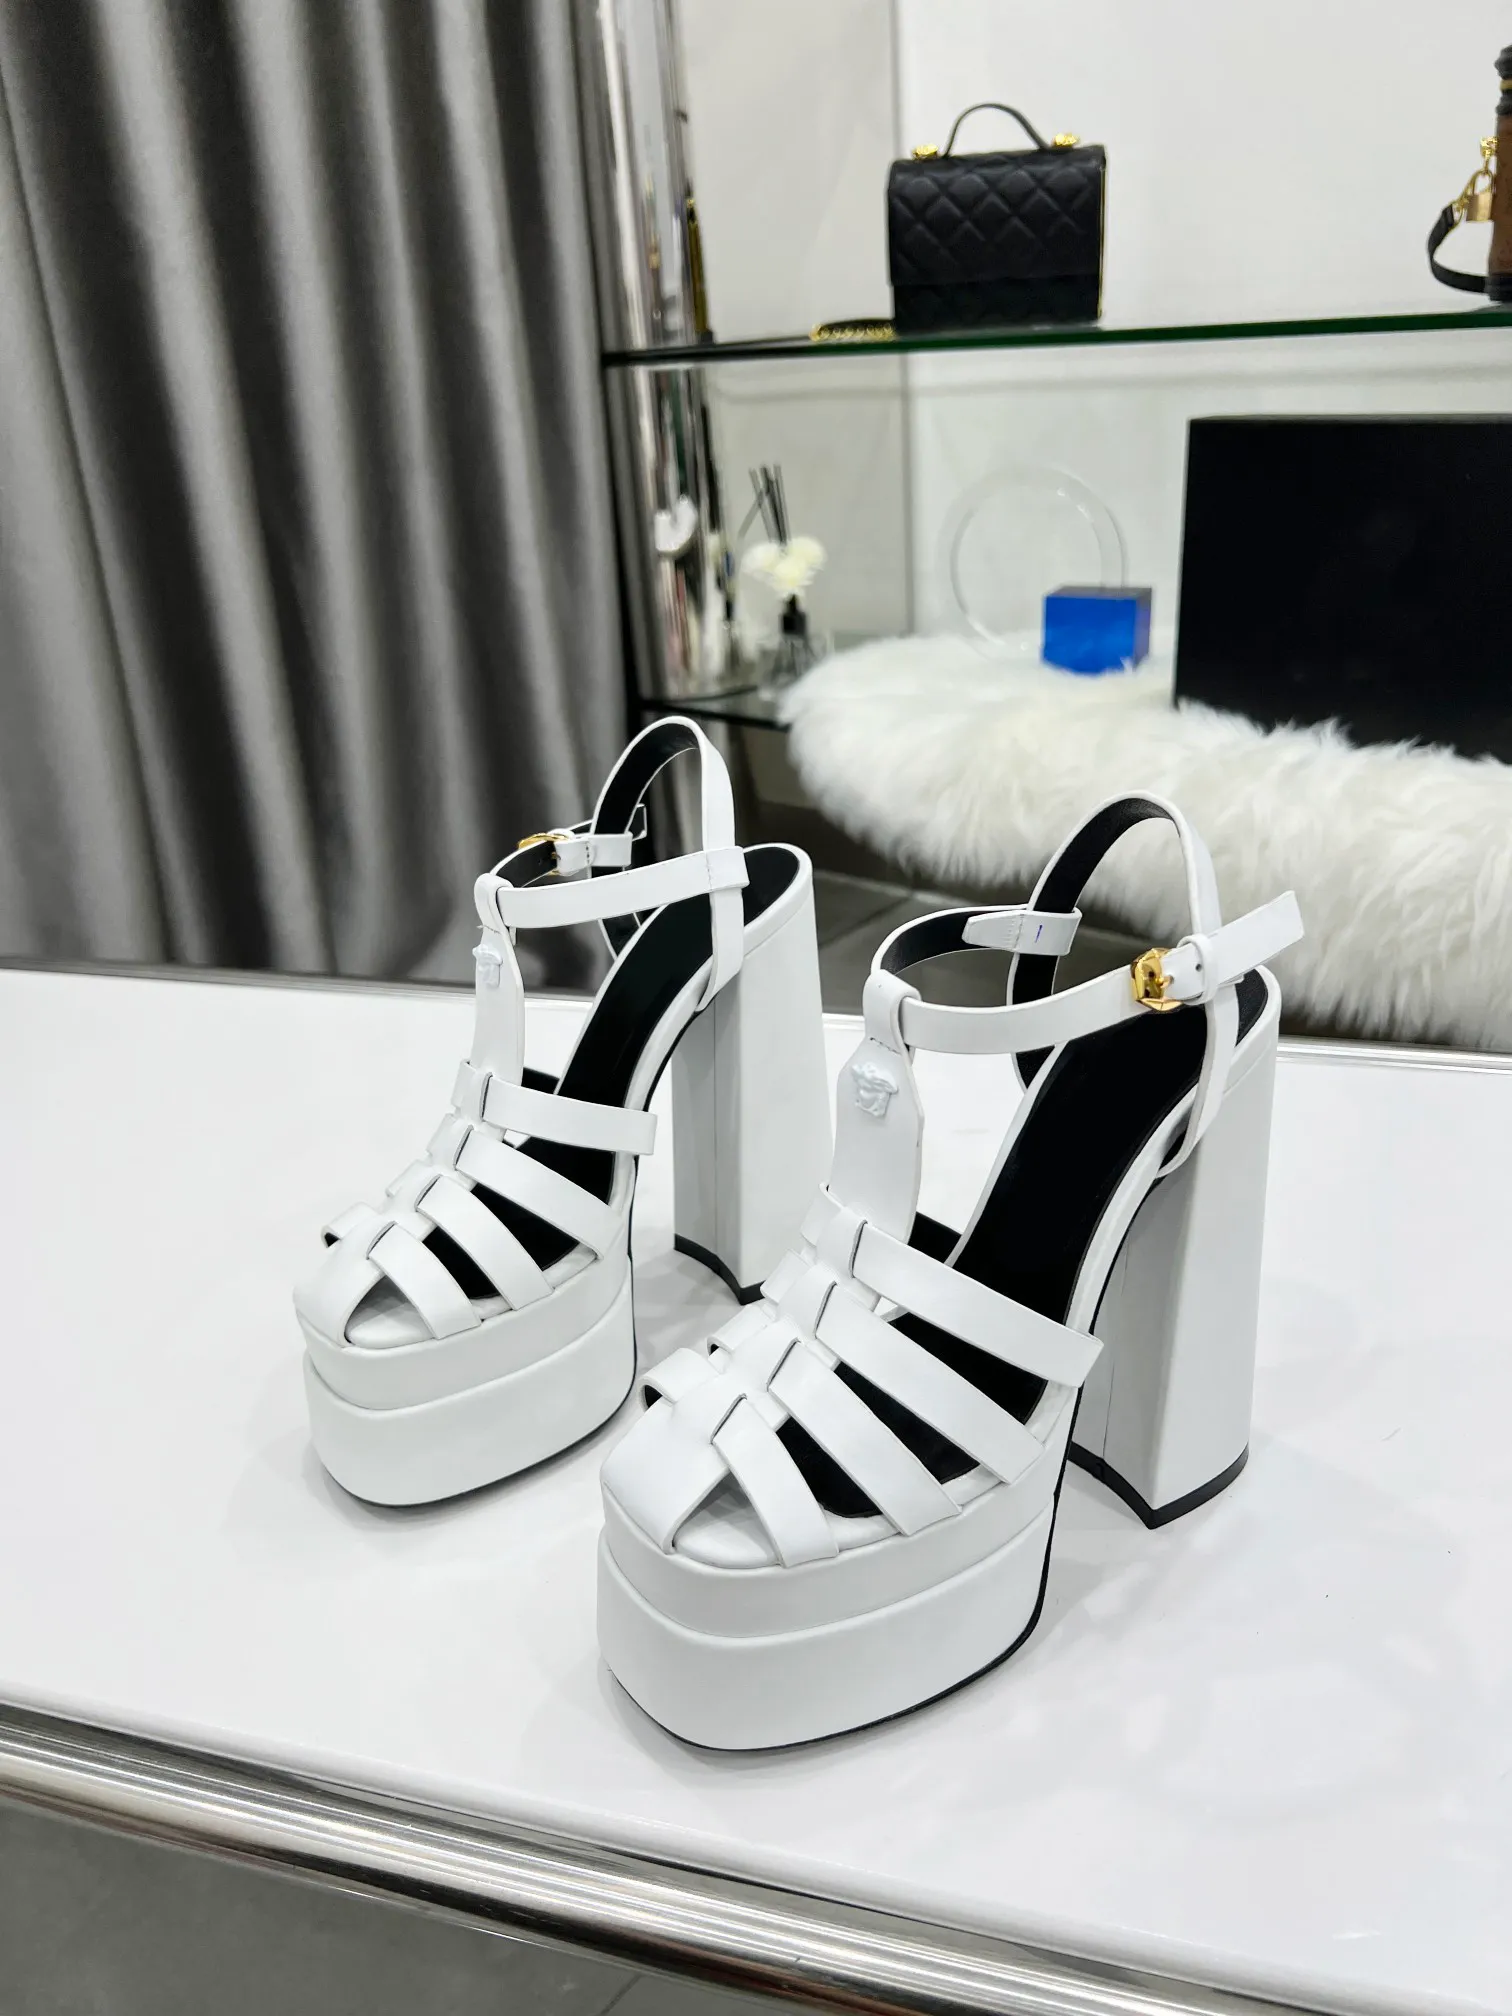 Bold shoes bring fashion to heel